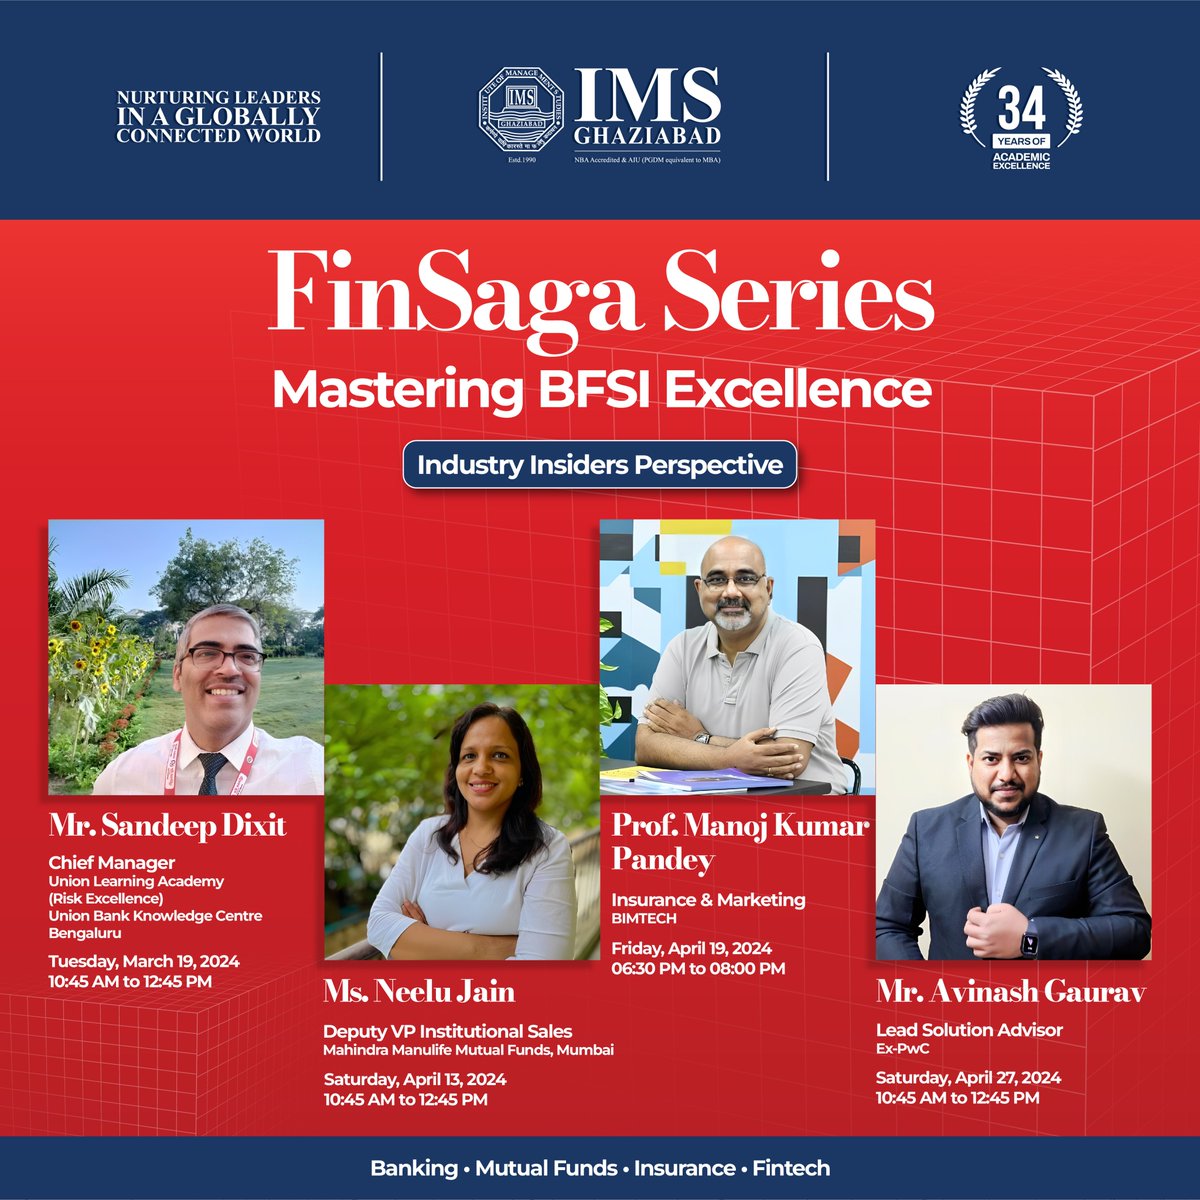 Unlock the secrets of BFSI Excellence with FinSaga Series, featuring industry insiders sharing their expertise at IMS Ghaziabad.
#FinSagaSeries #BFSIExcellence #IndustryInsights #IndustryExpert #FinanceManagement